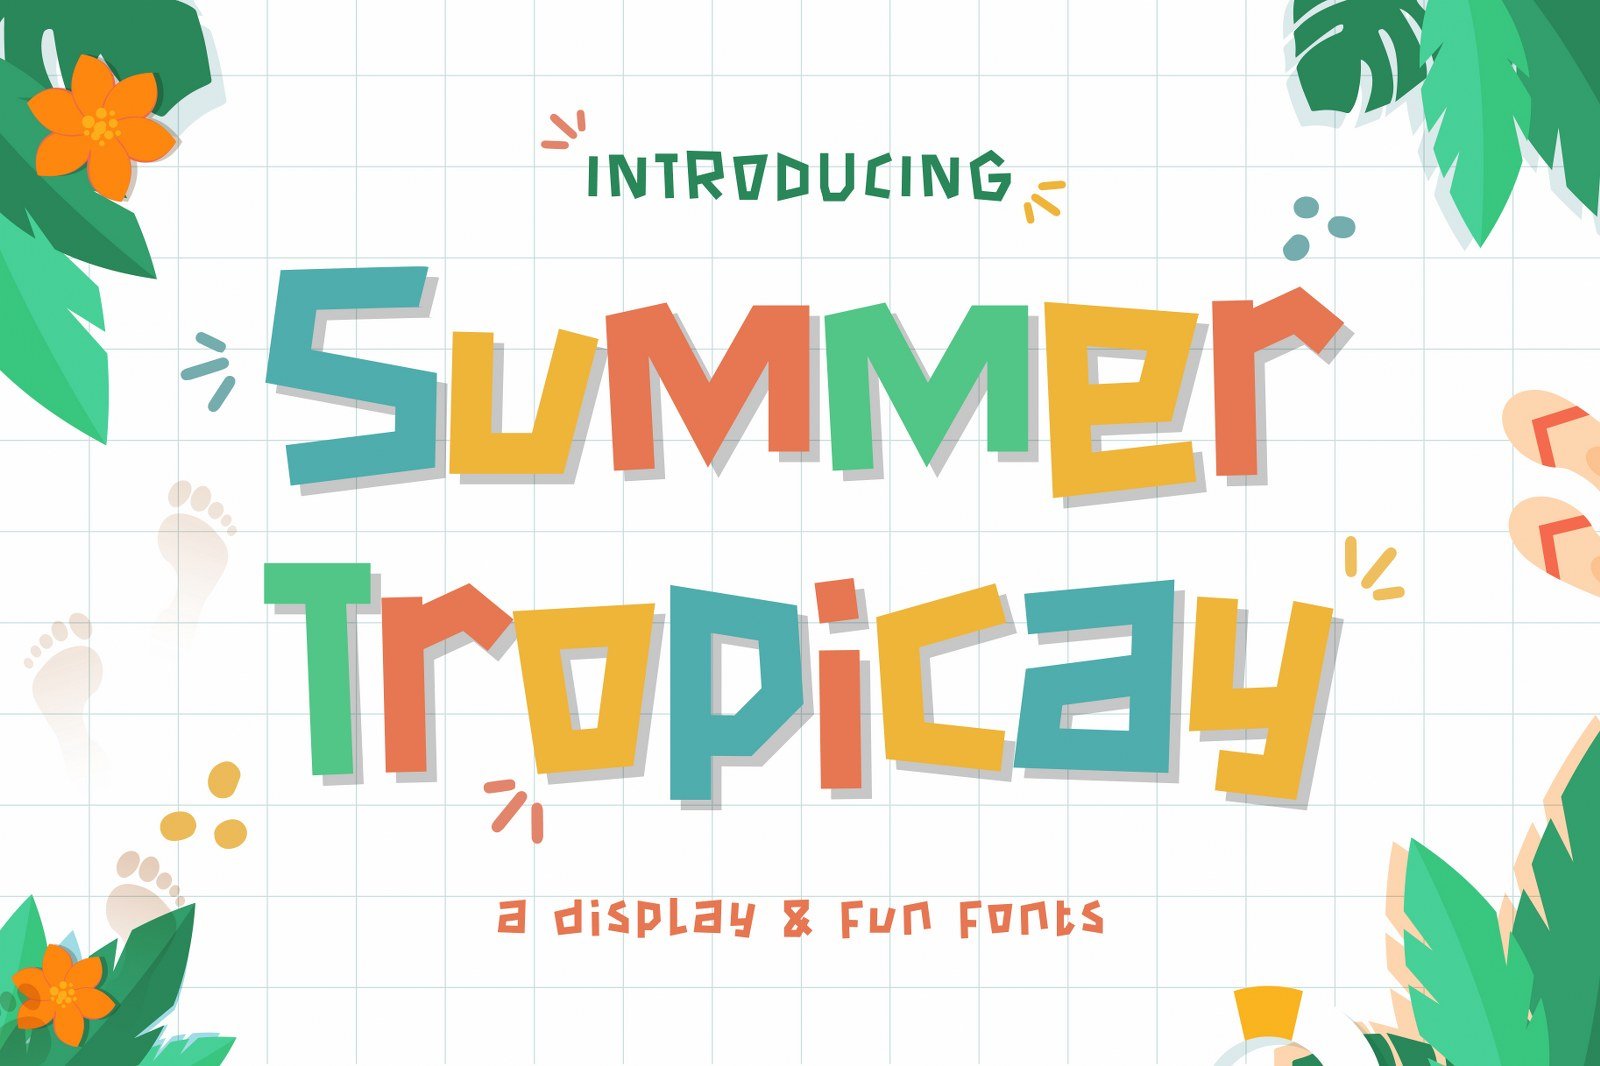 Summer Tropica - Playful Font cover image.